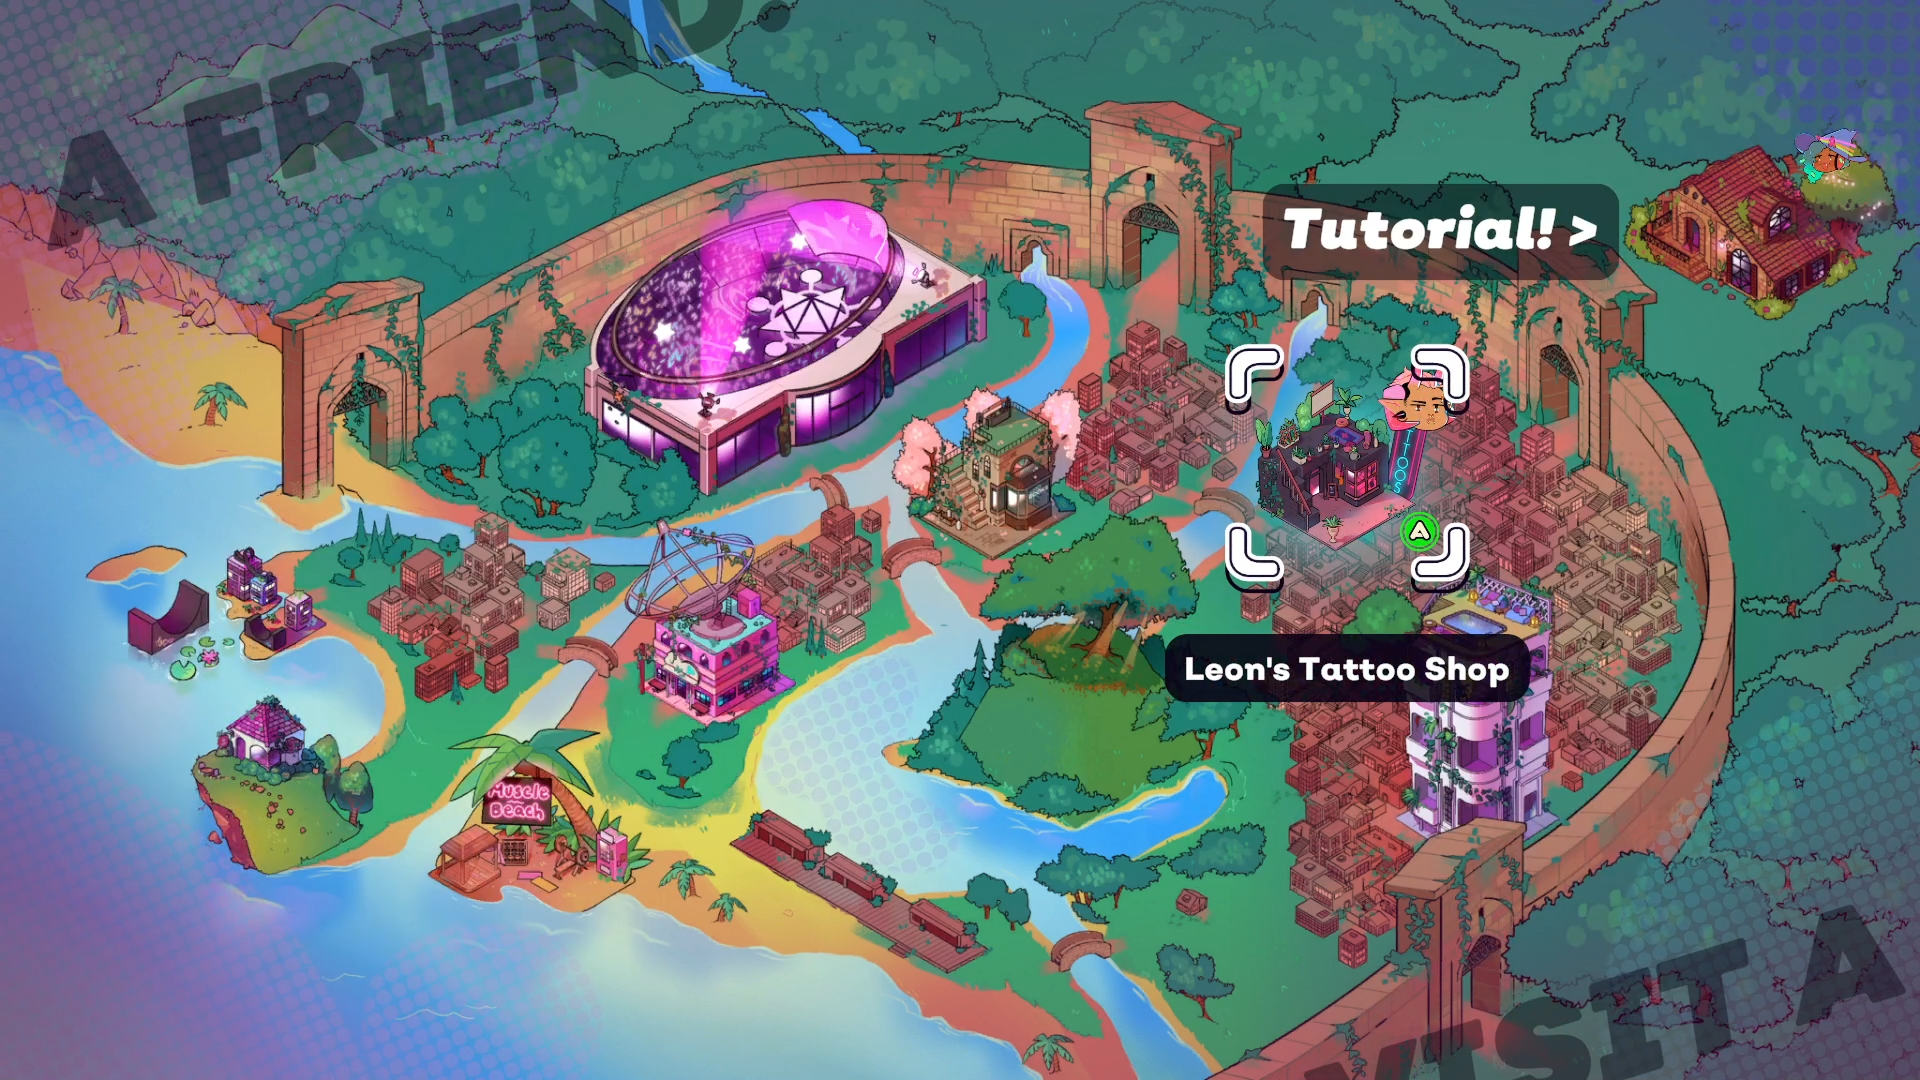 Screenshot of the Spirit Swap map with Leon's tattoo shop highlighted